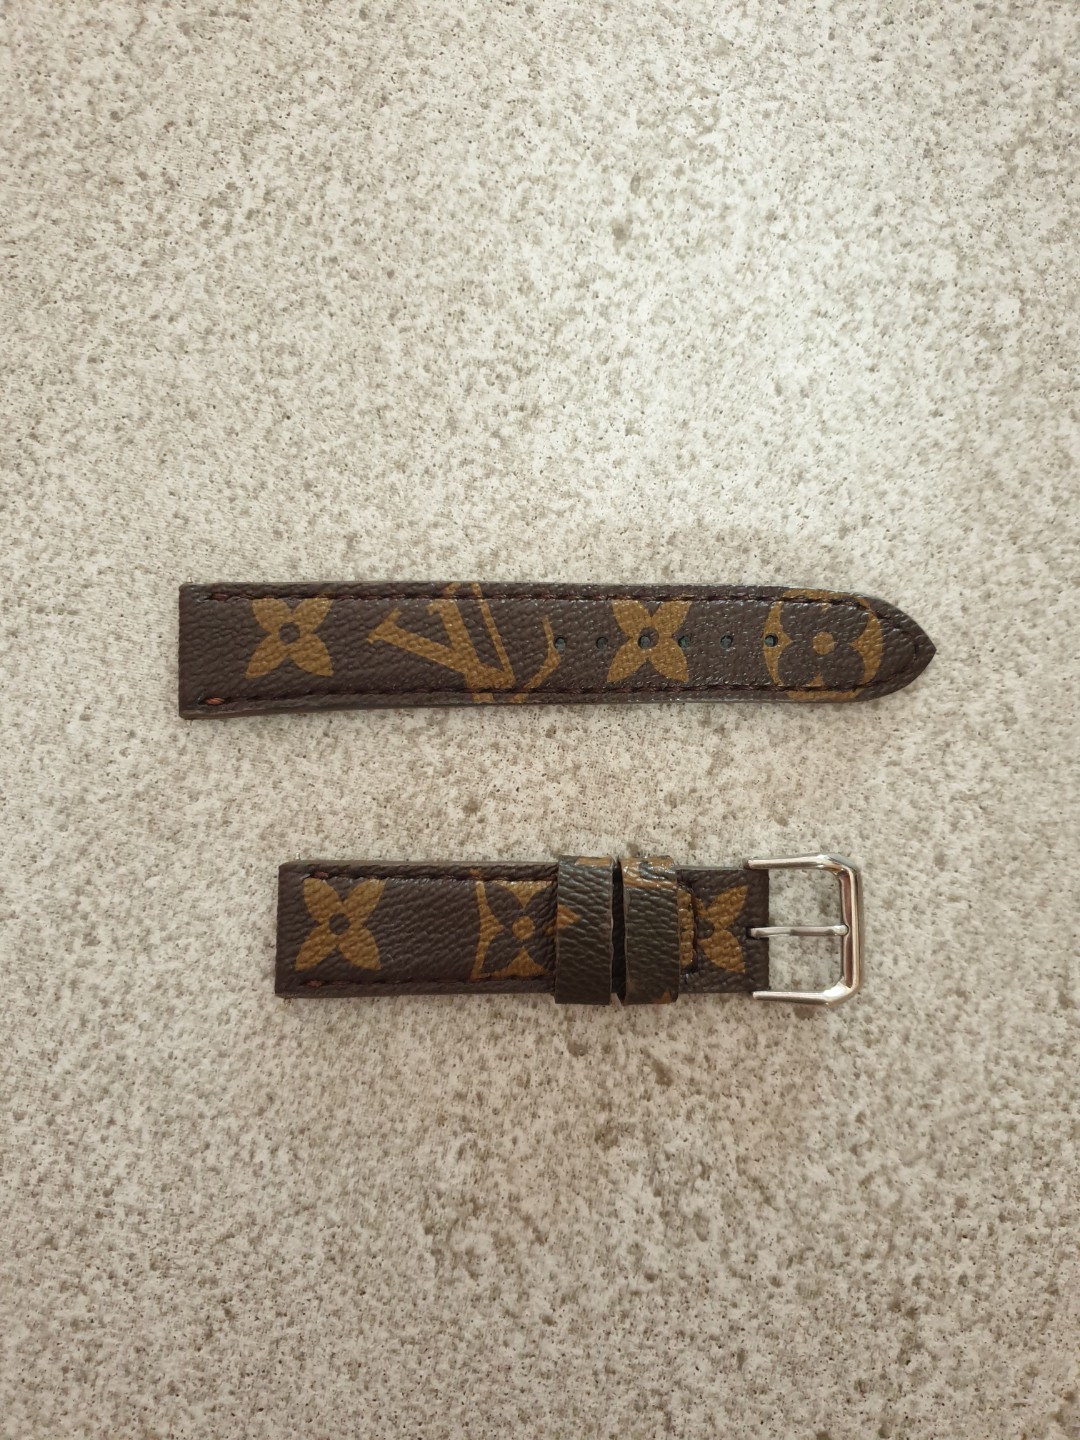 lv watch band 20mm